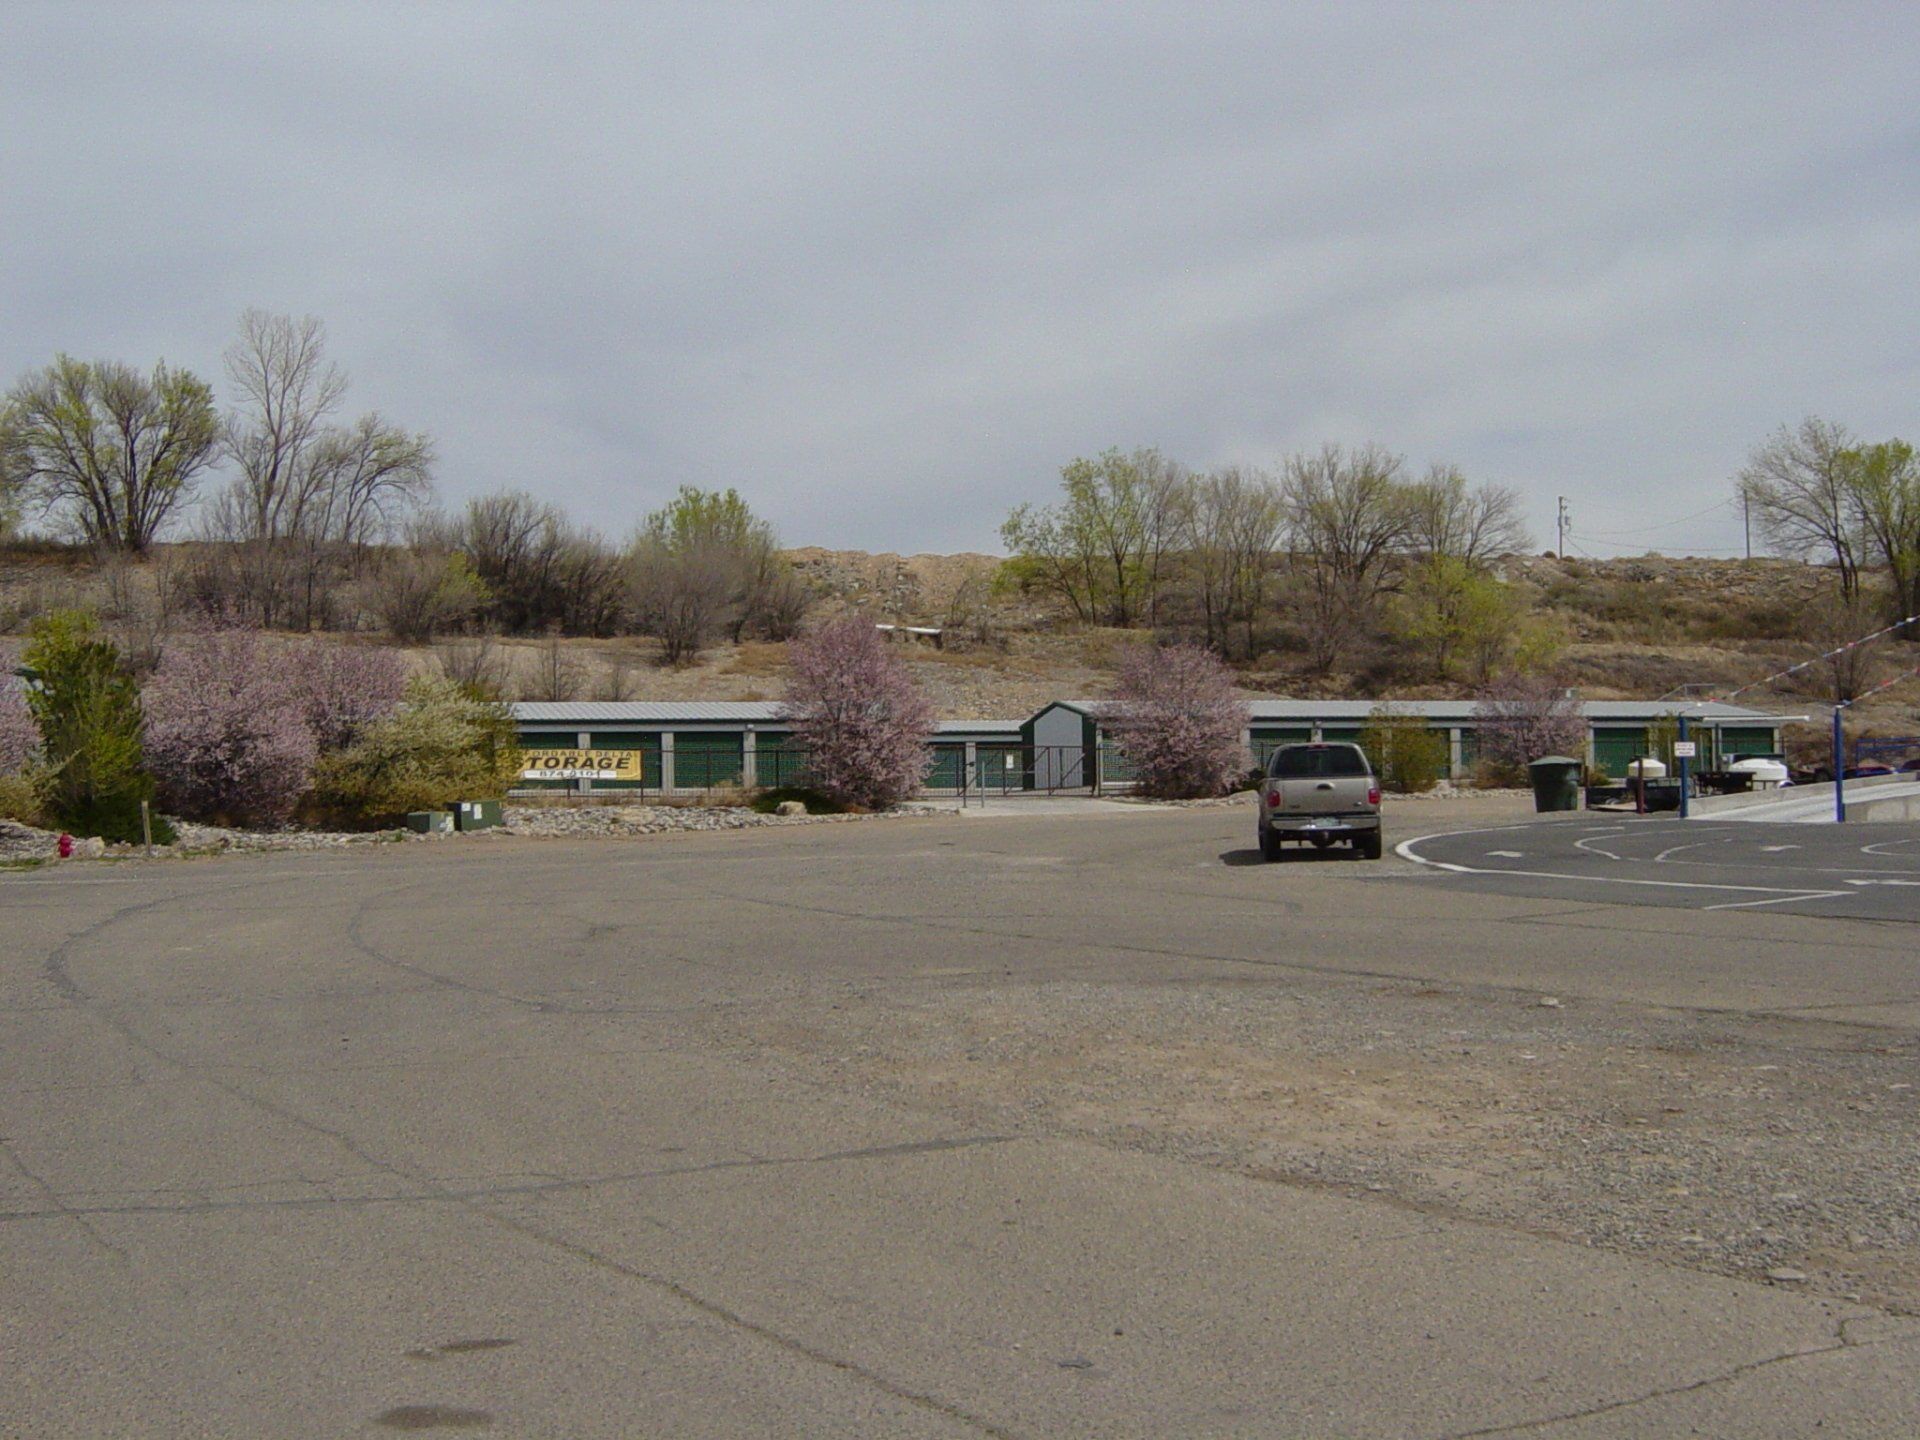 Storage Facility with Trees - Affordable Storage in Delta, CO